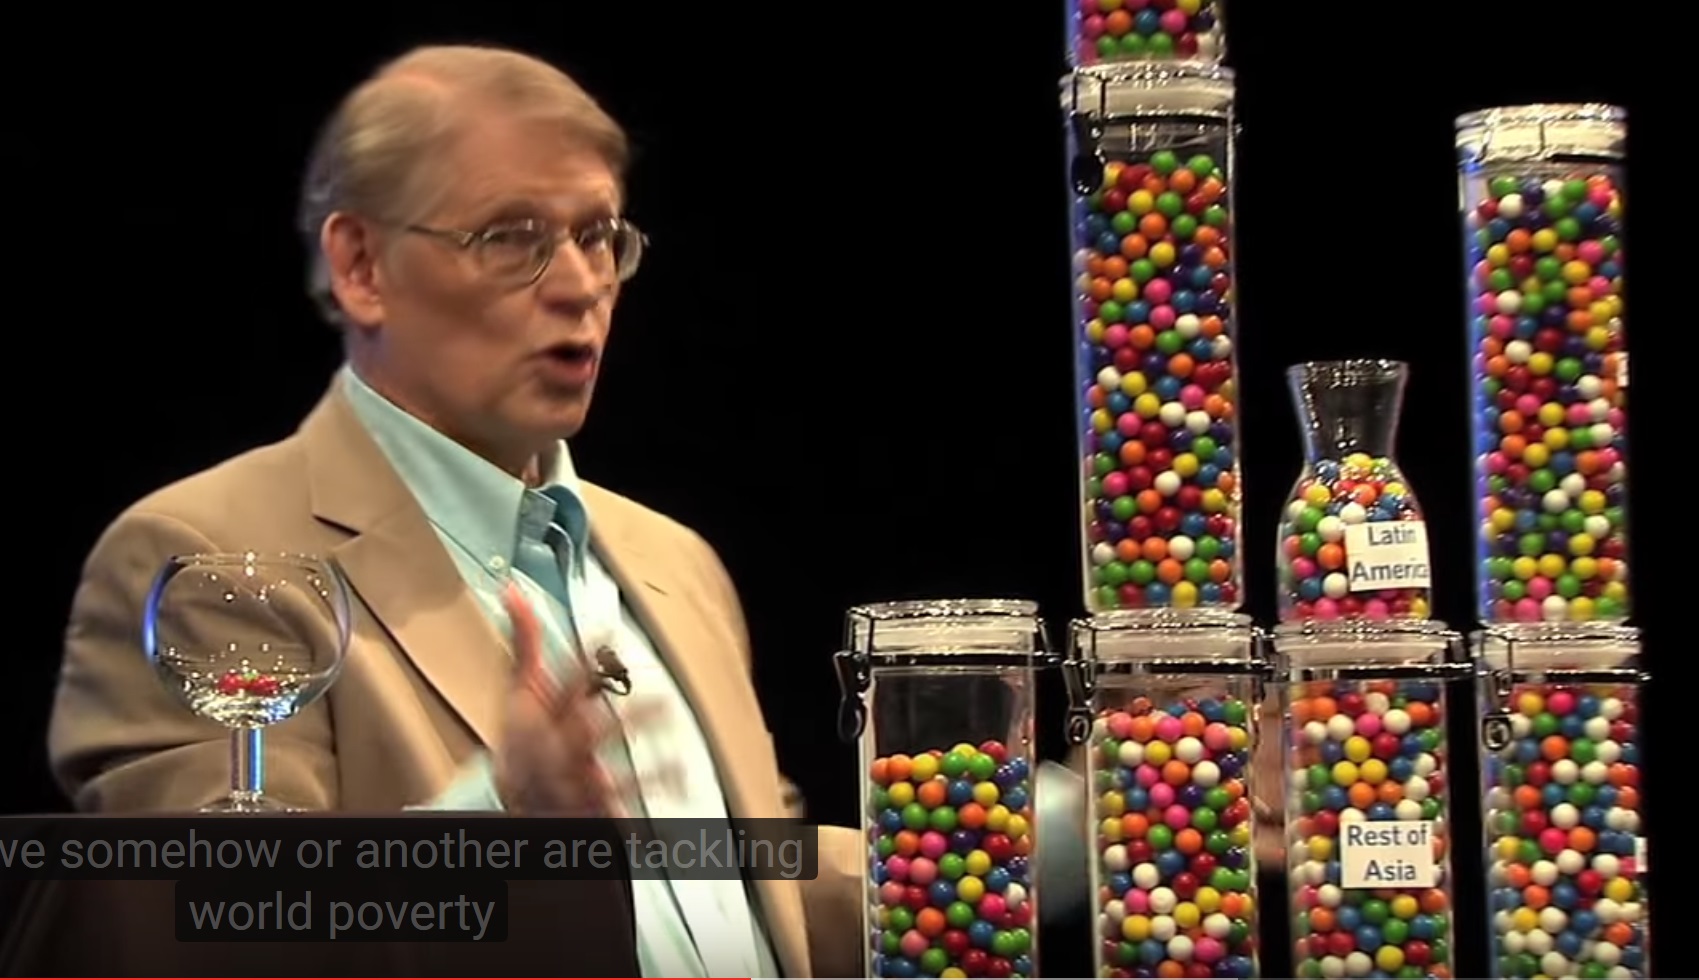 Media’s totally false narrative about refugees demolished by simple visual demonstration involving GUMBALLS (video)